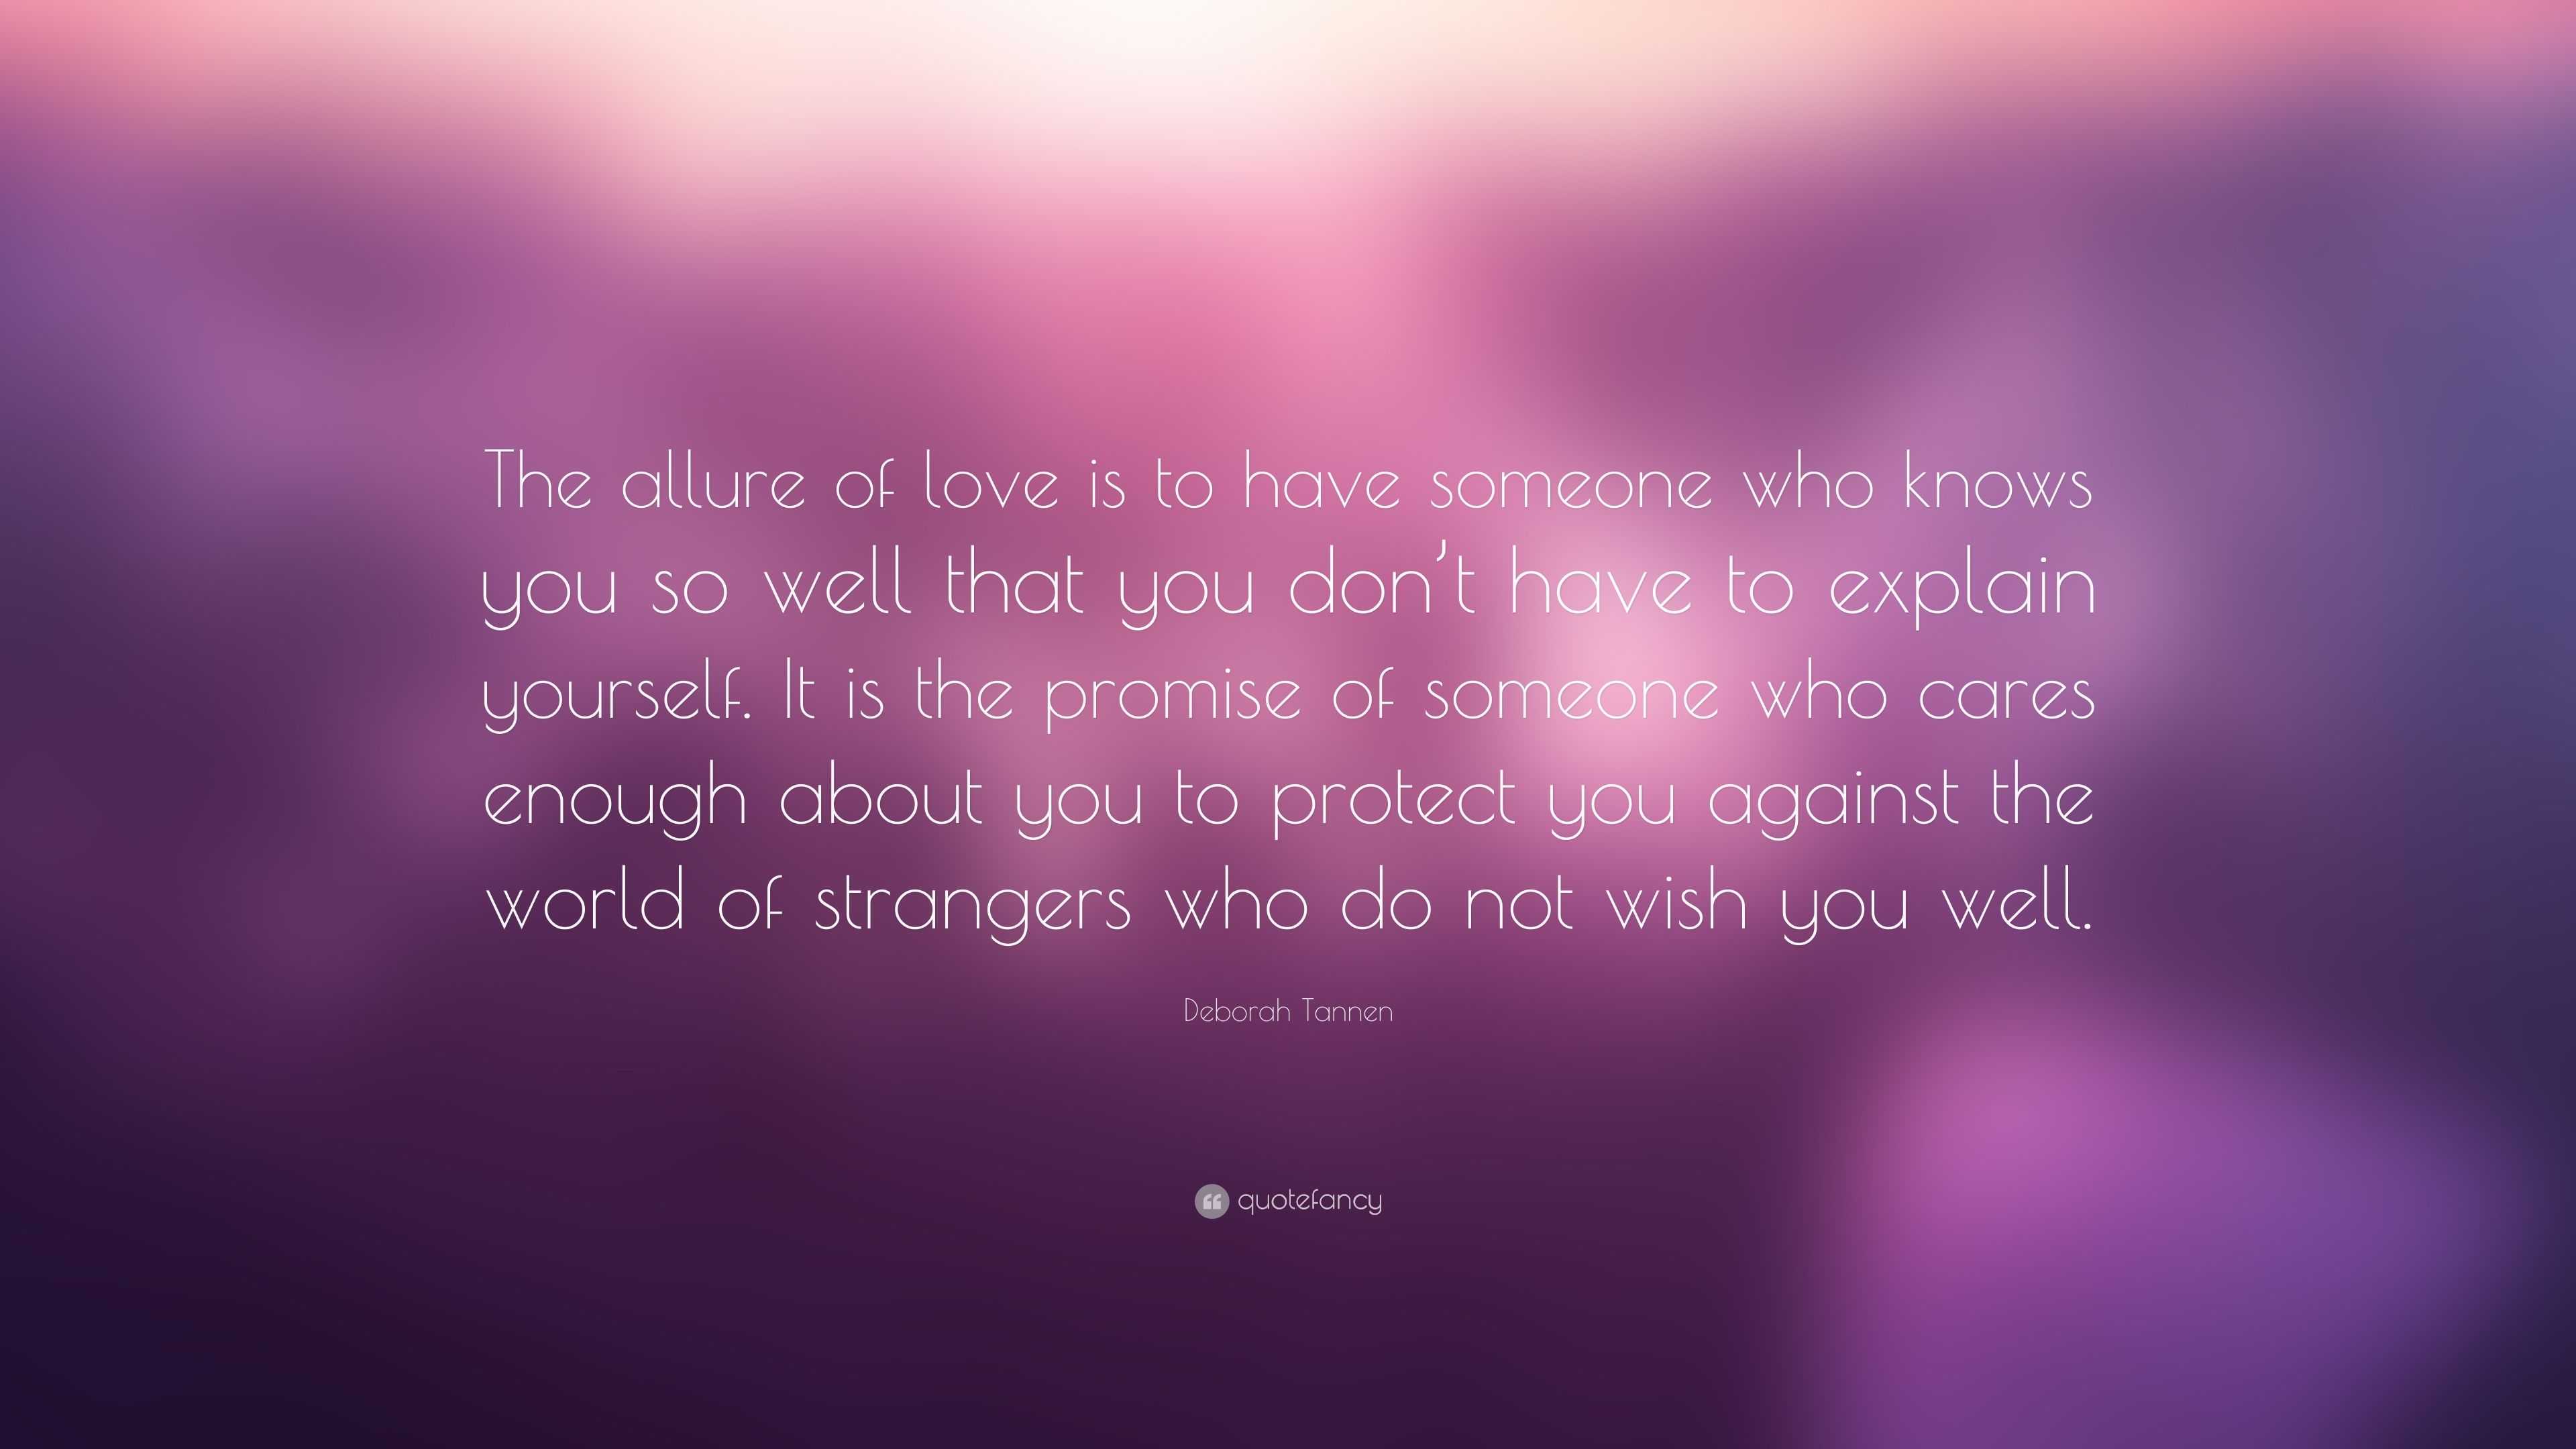 Deborah Tannen Quote “the Allure Of Love Is To Have Someone Who Knows You So Well That You Don